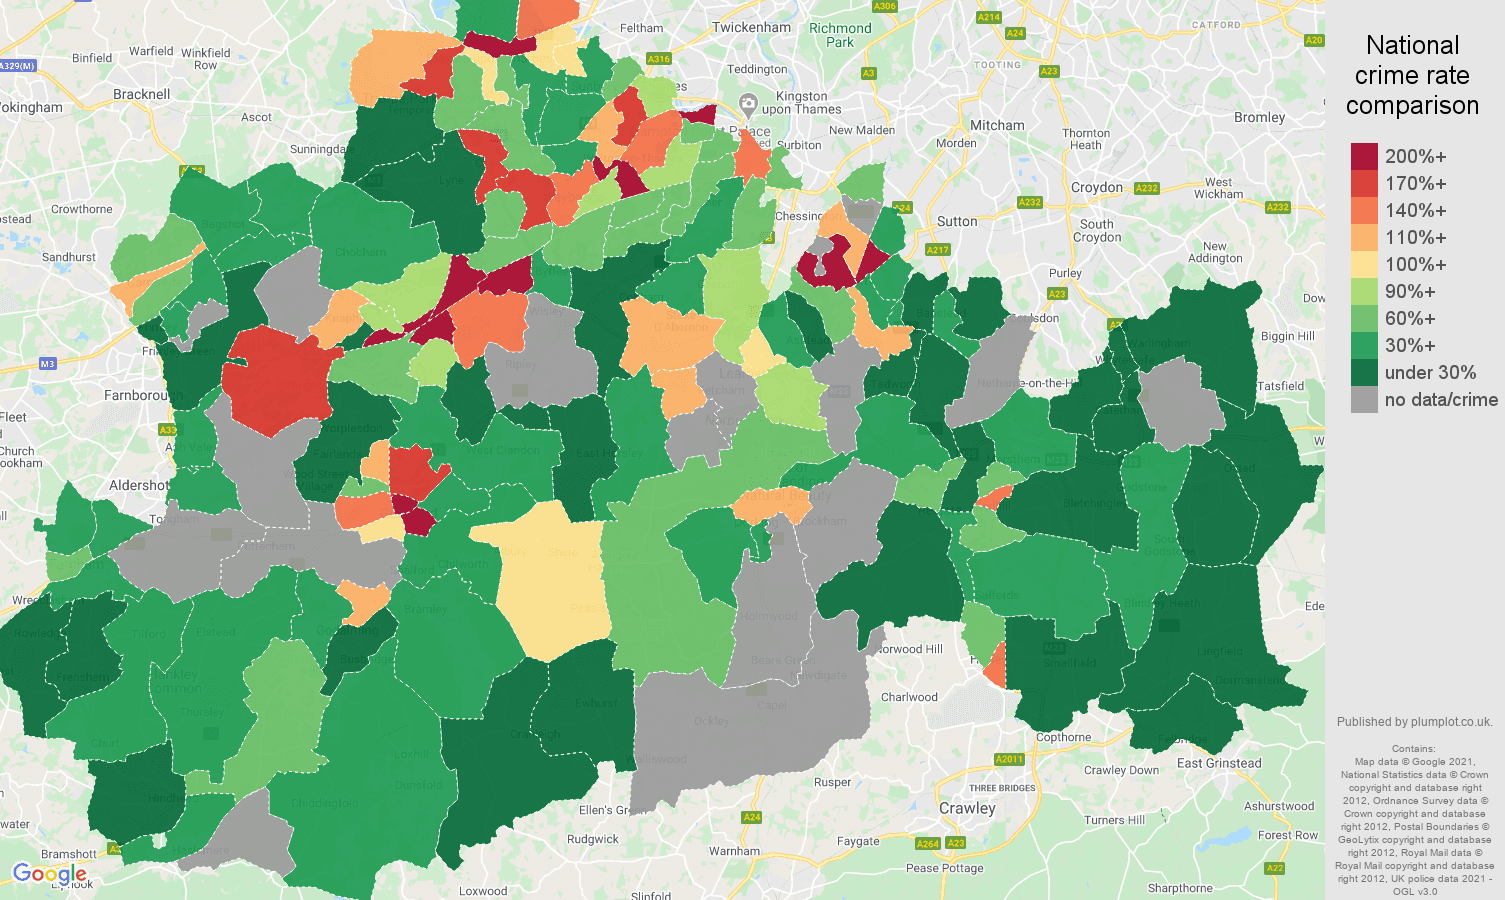 Surrey bicycle theft crime rate comparison map